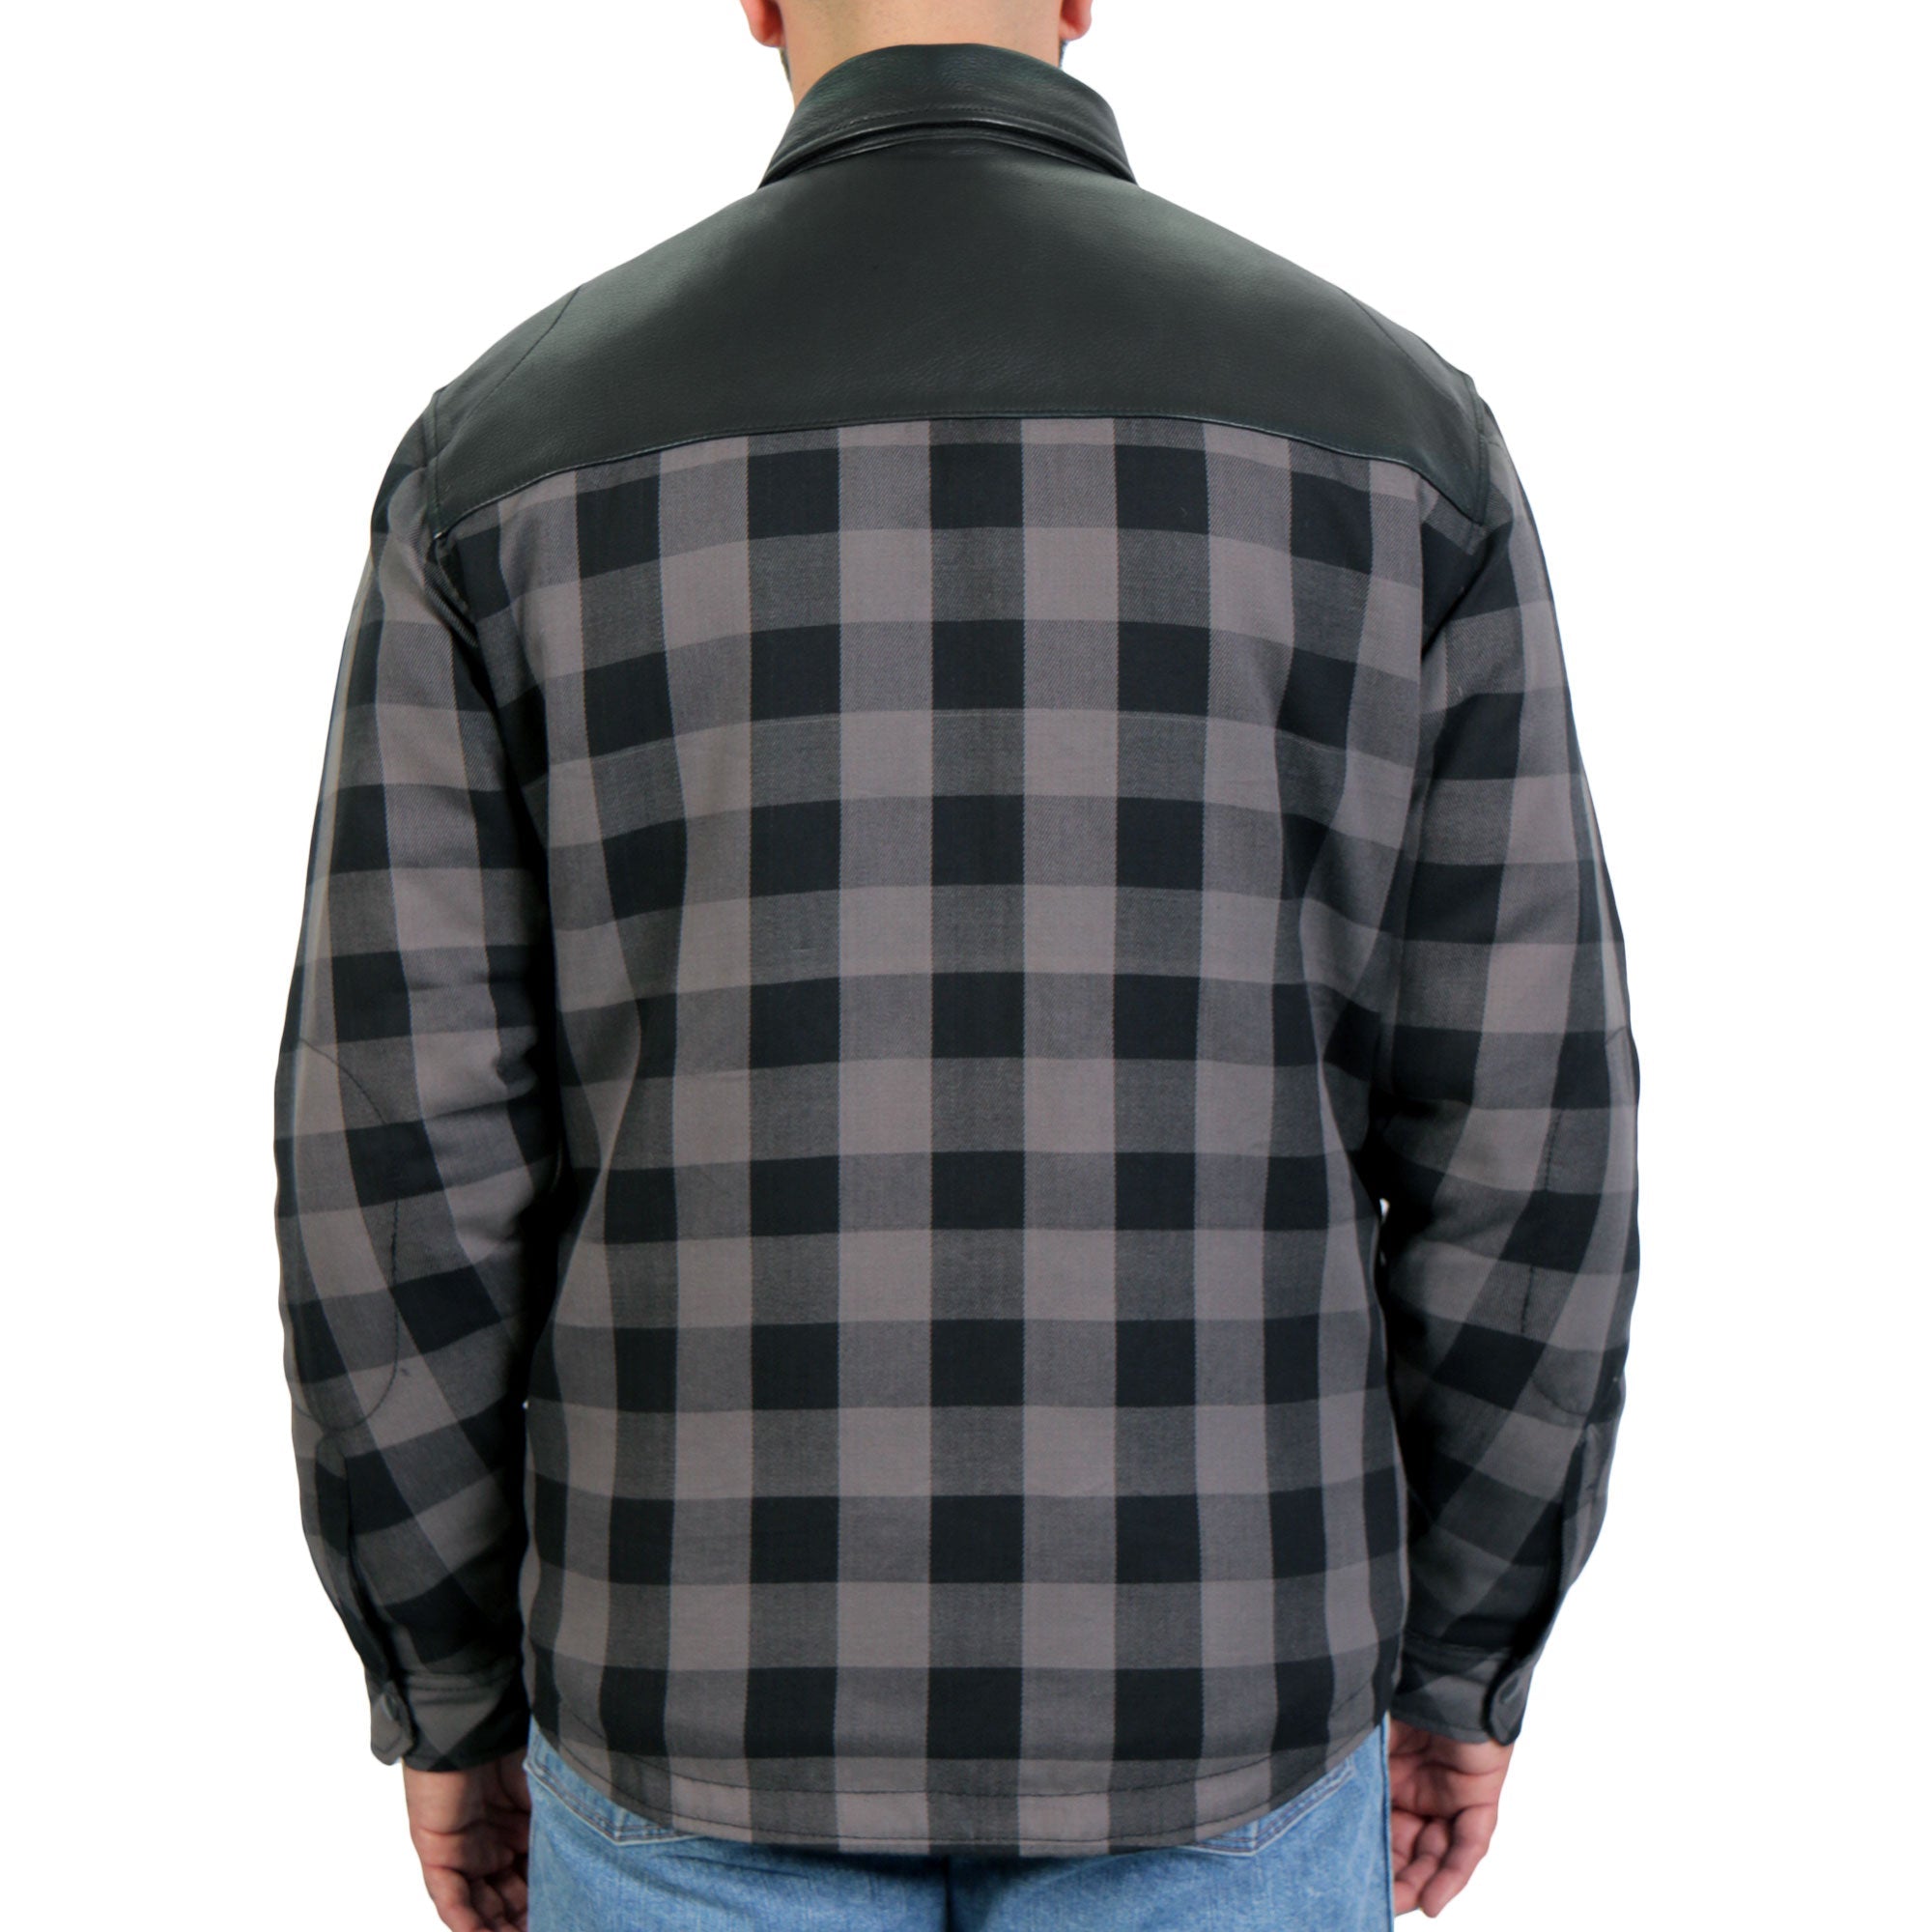 Hot Leathers JKM3203 Men's Motorcycle style Grey and Black Kevlar Reinforced Leather and Plaid Flannel Biker Shirt